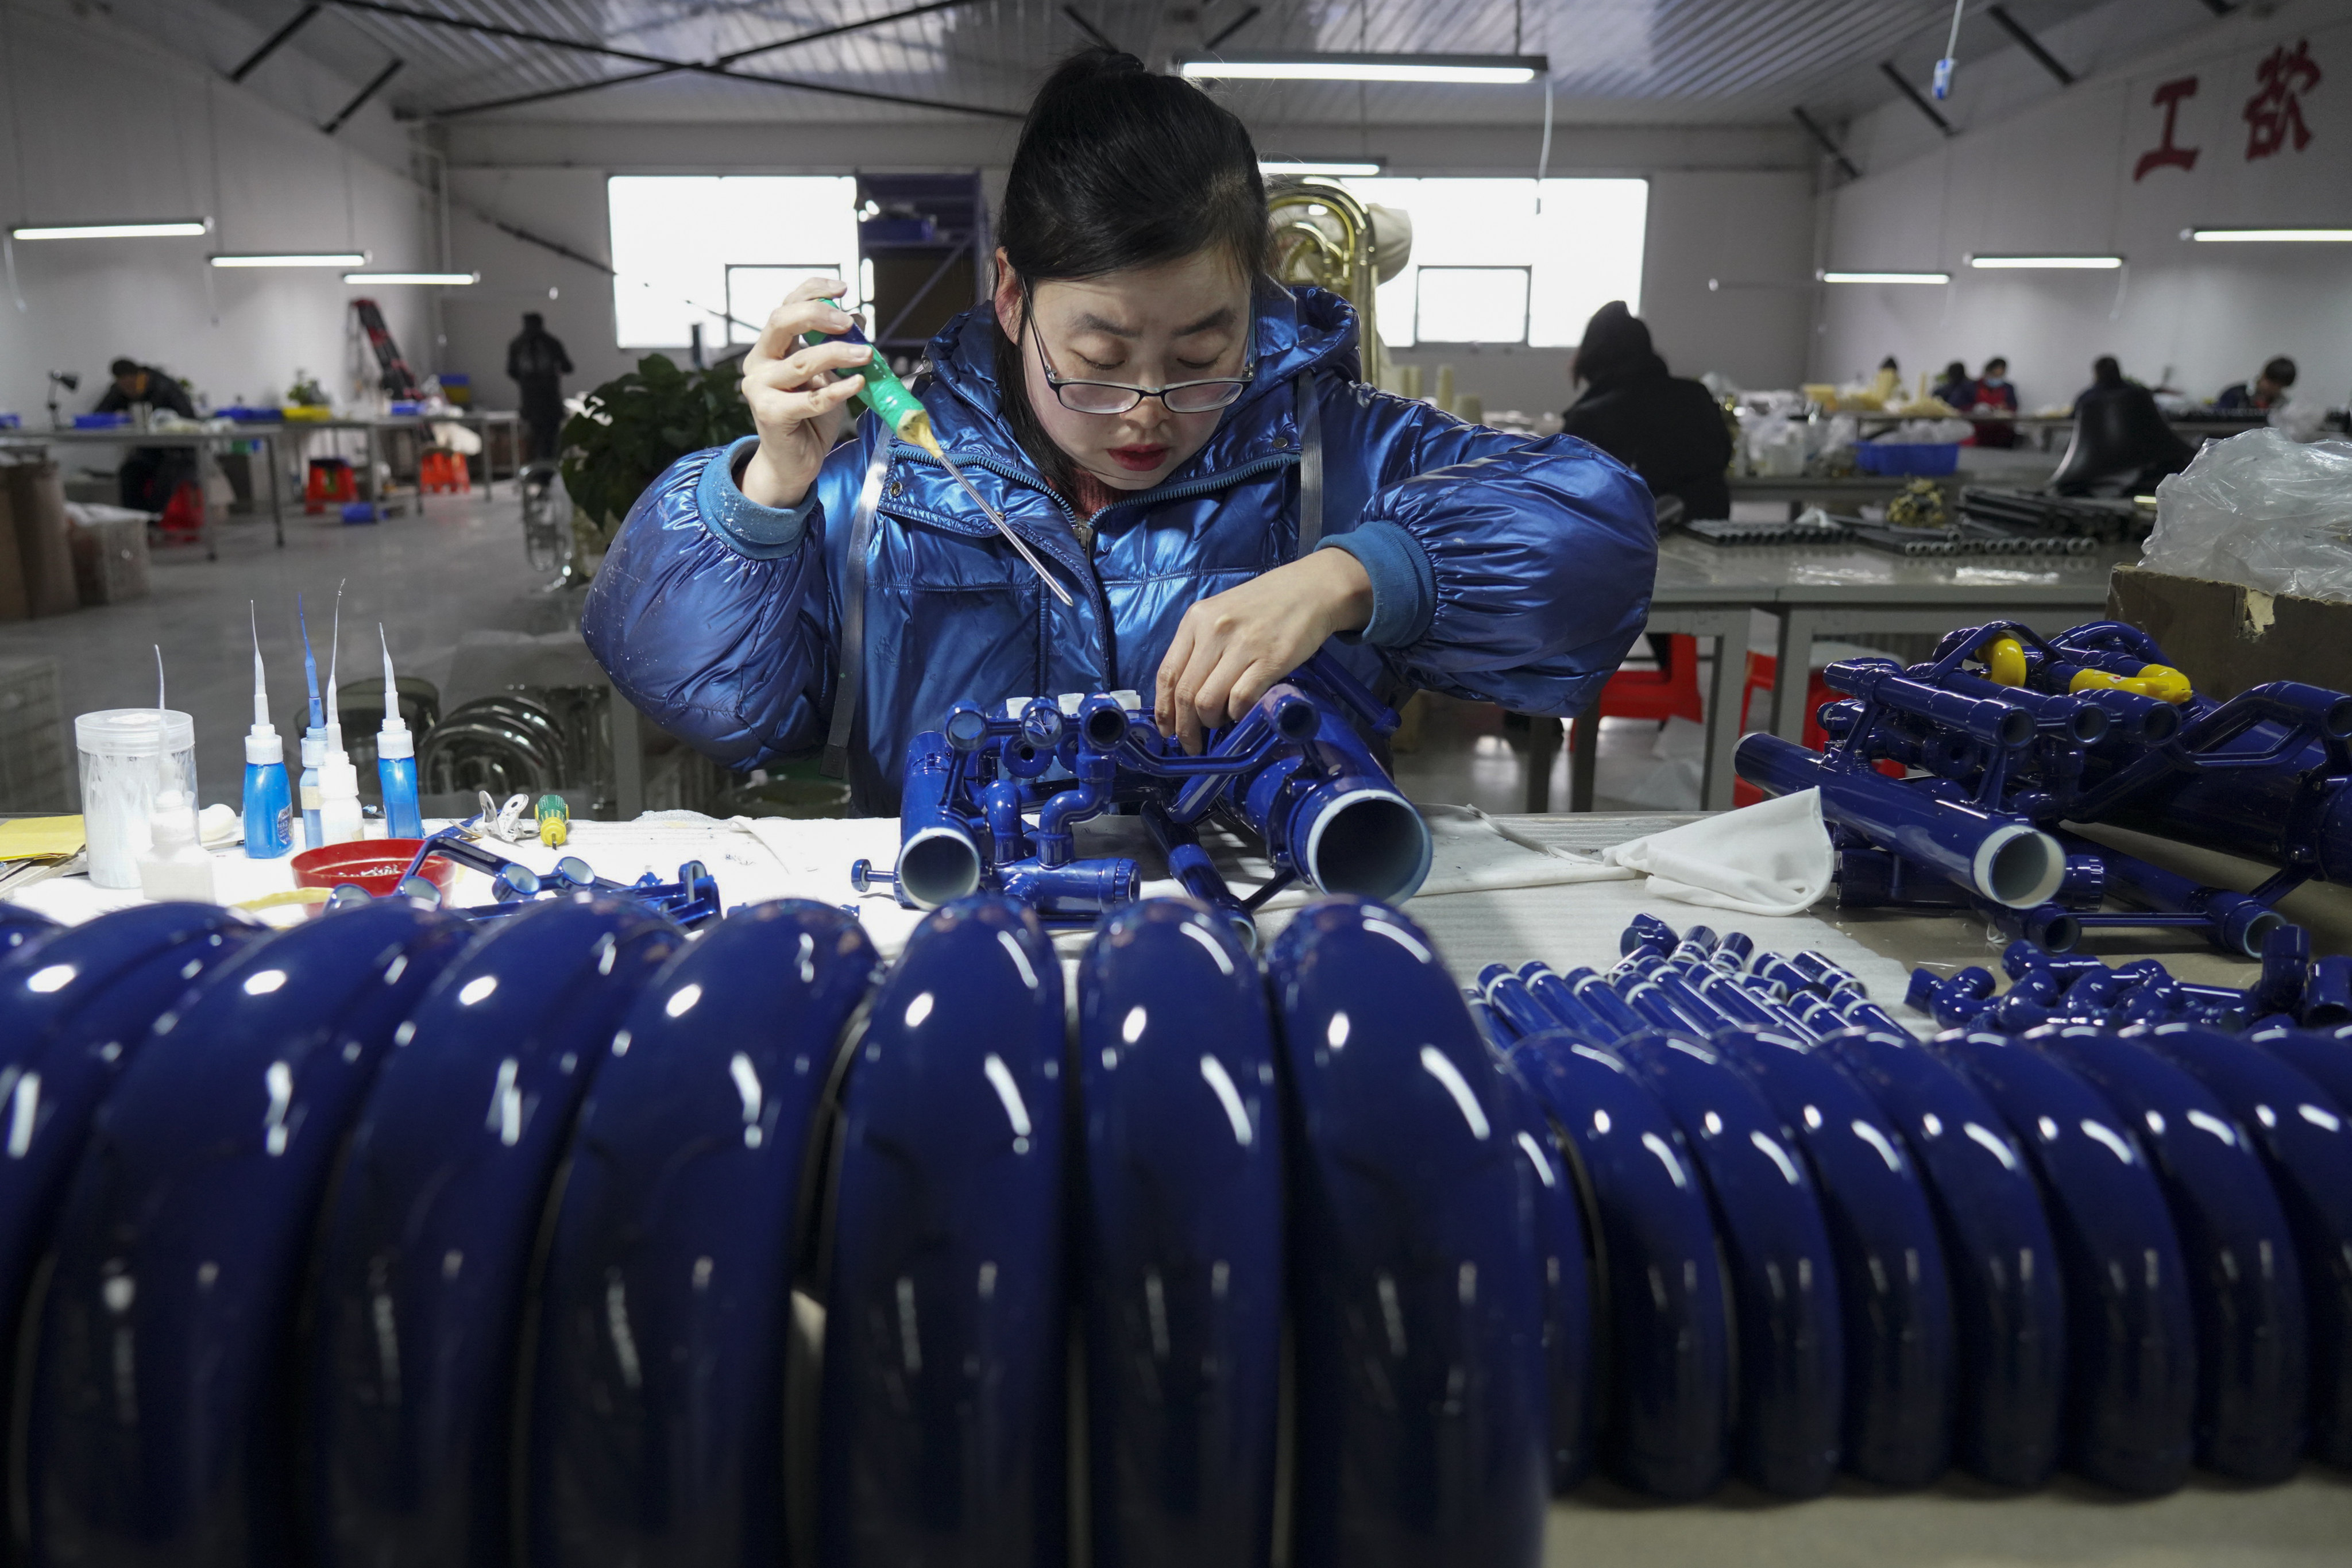 China’s top economic planner is establishing direct lines of communications with private businesses, but what will be done about their concerns in China’s economically sluggish post-Covid climate? Photo: AP